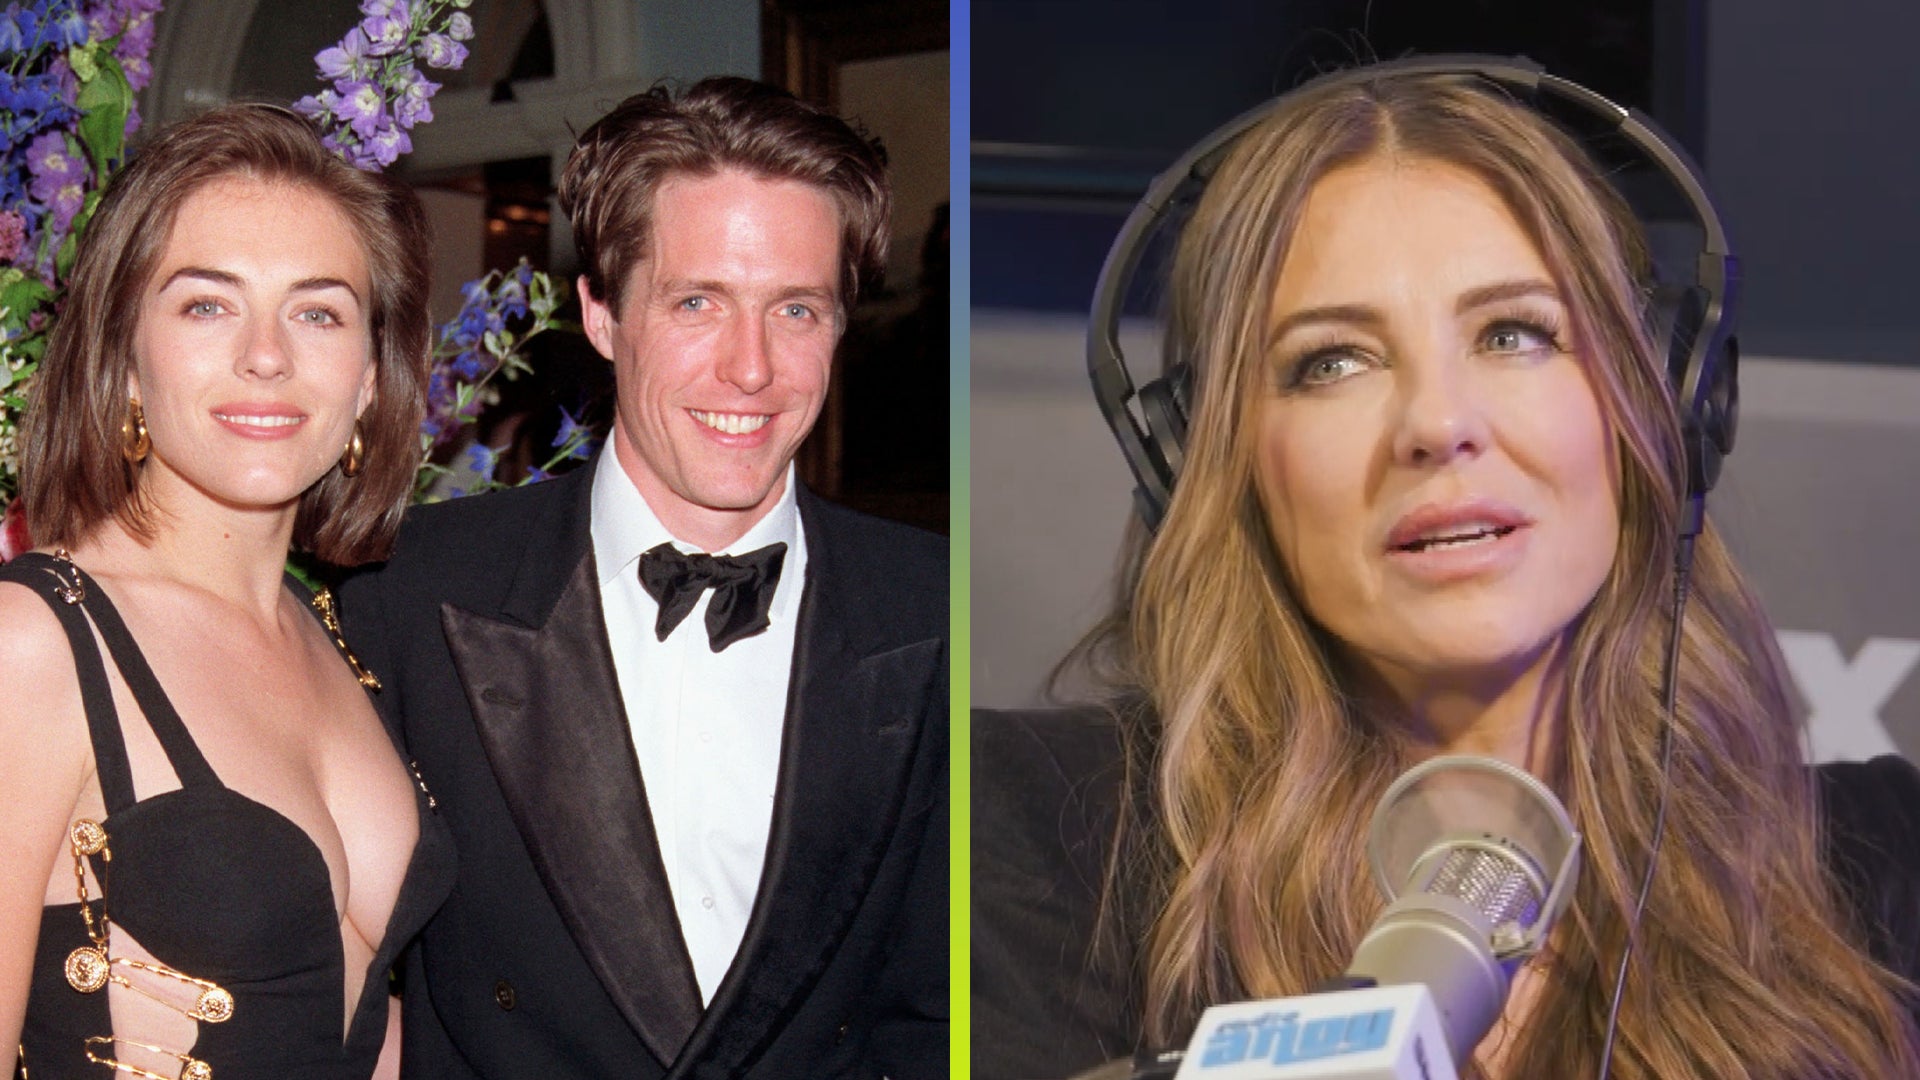 Elizabeth Hurley Says She Used to Bicker With Ex Hugh Grant About Having Kids